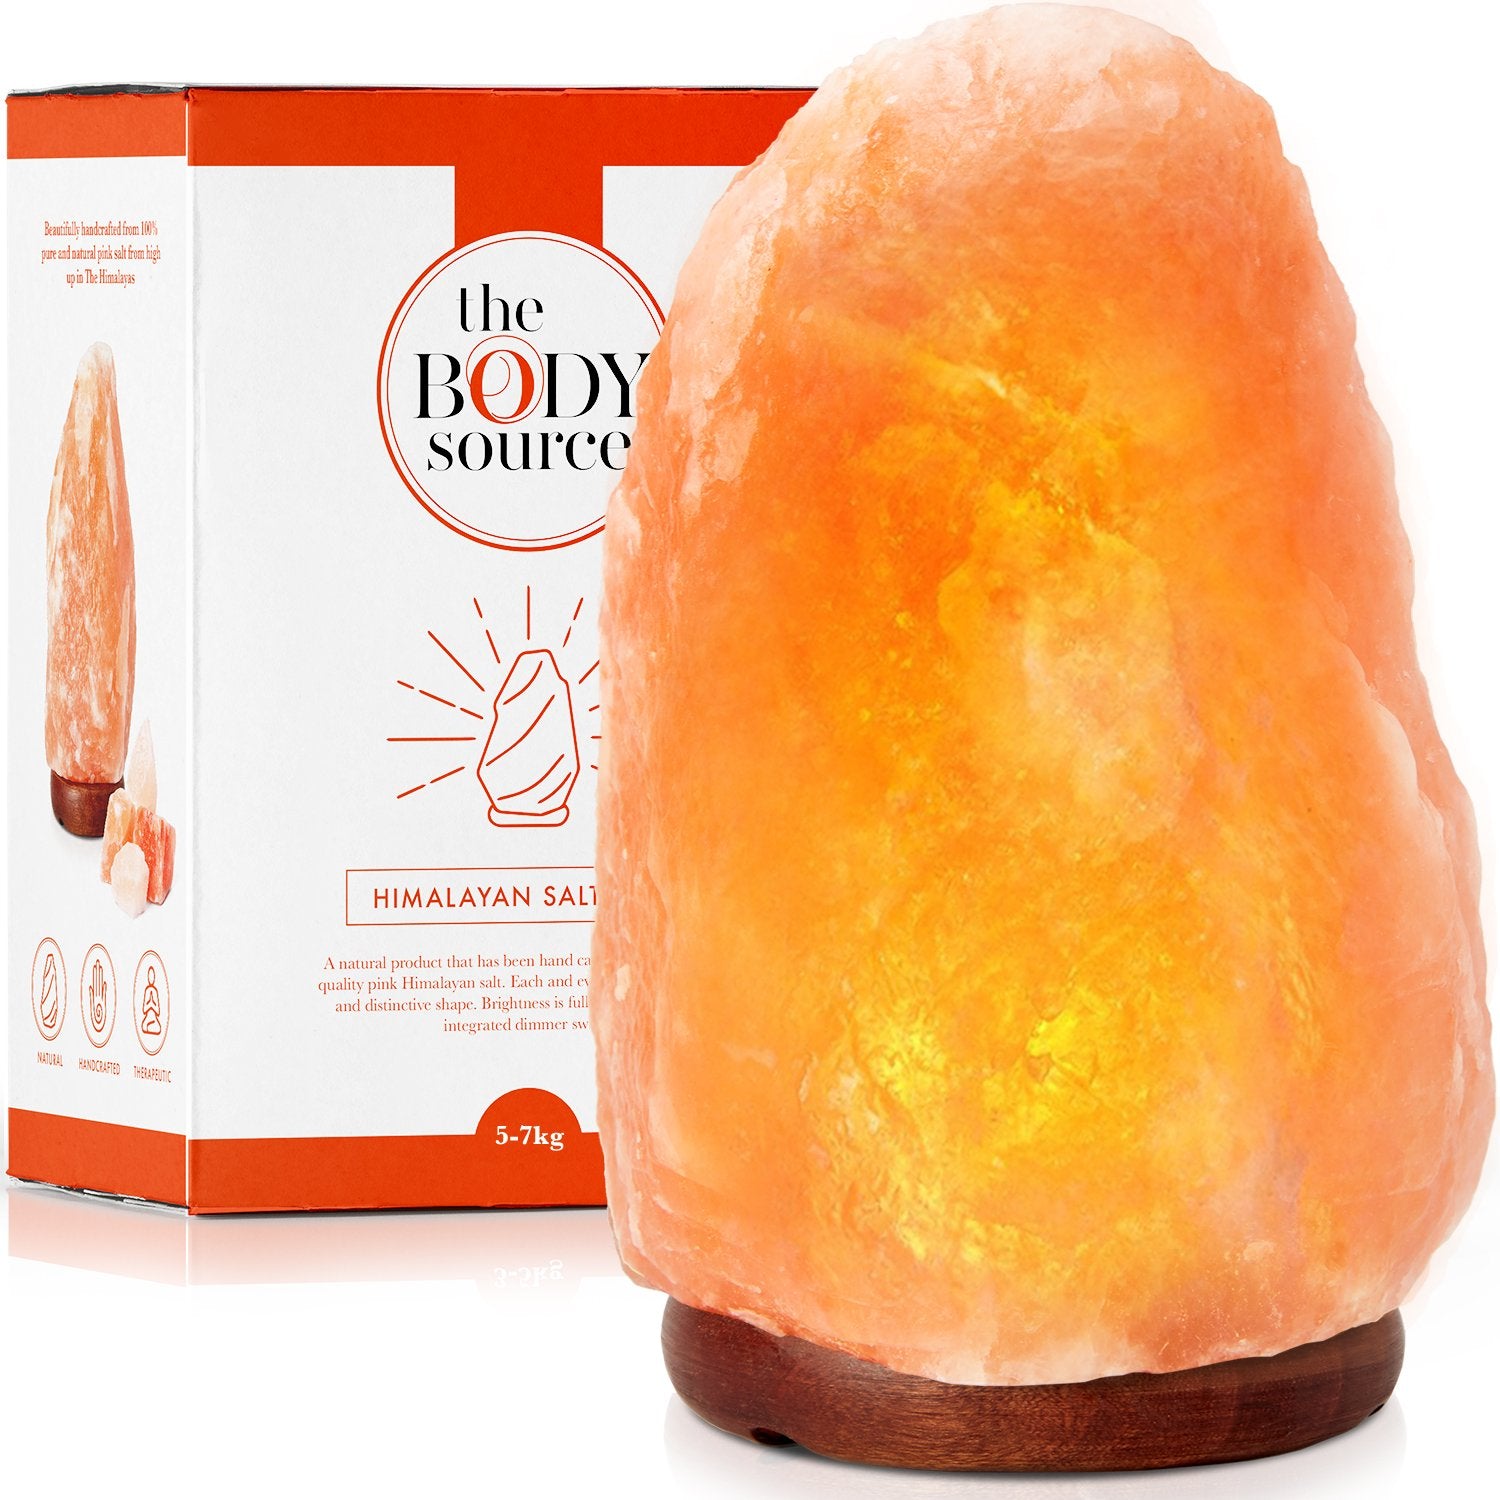 The Body Source Himalayan Salt Lamp (5-7kg) with Dimmer Switch - All Natural and Handcrafted with Wooden Base